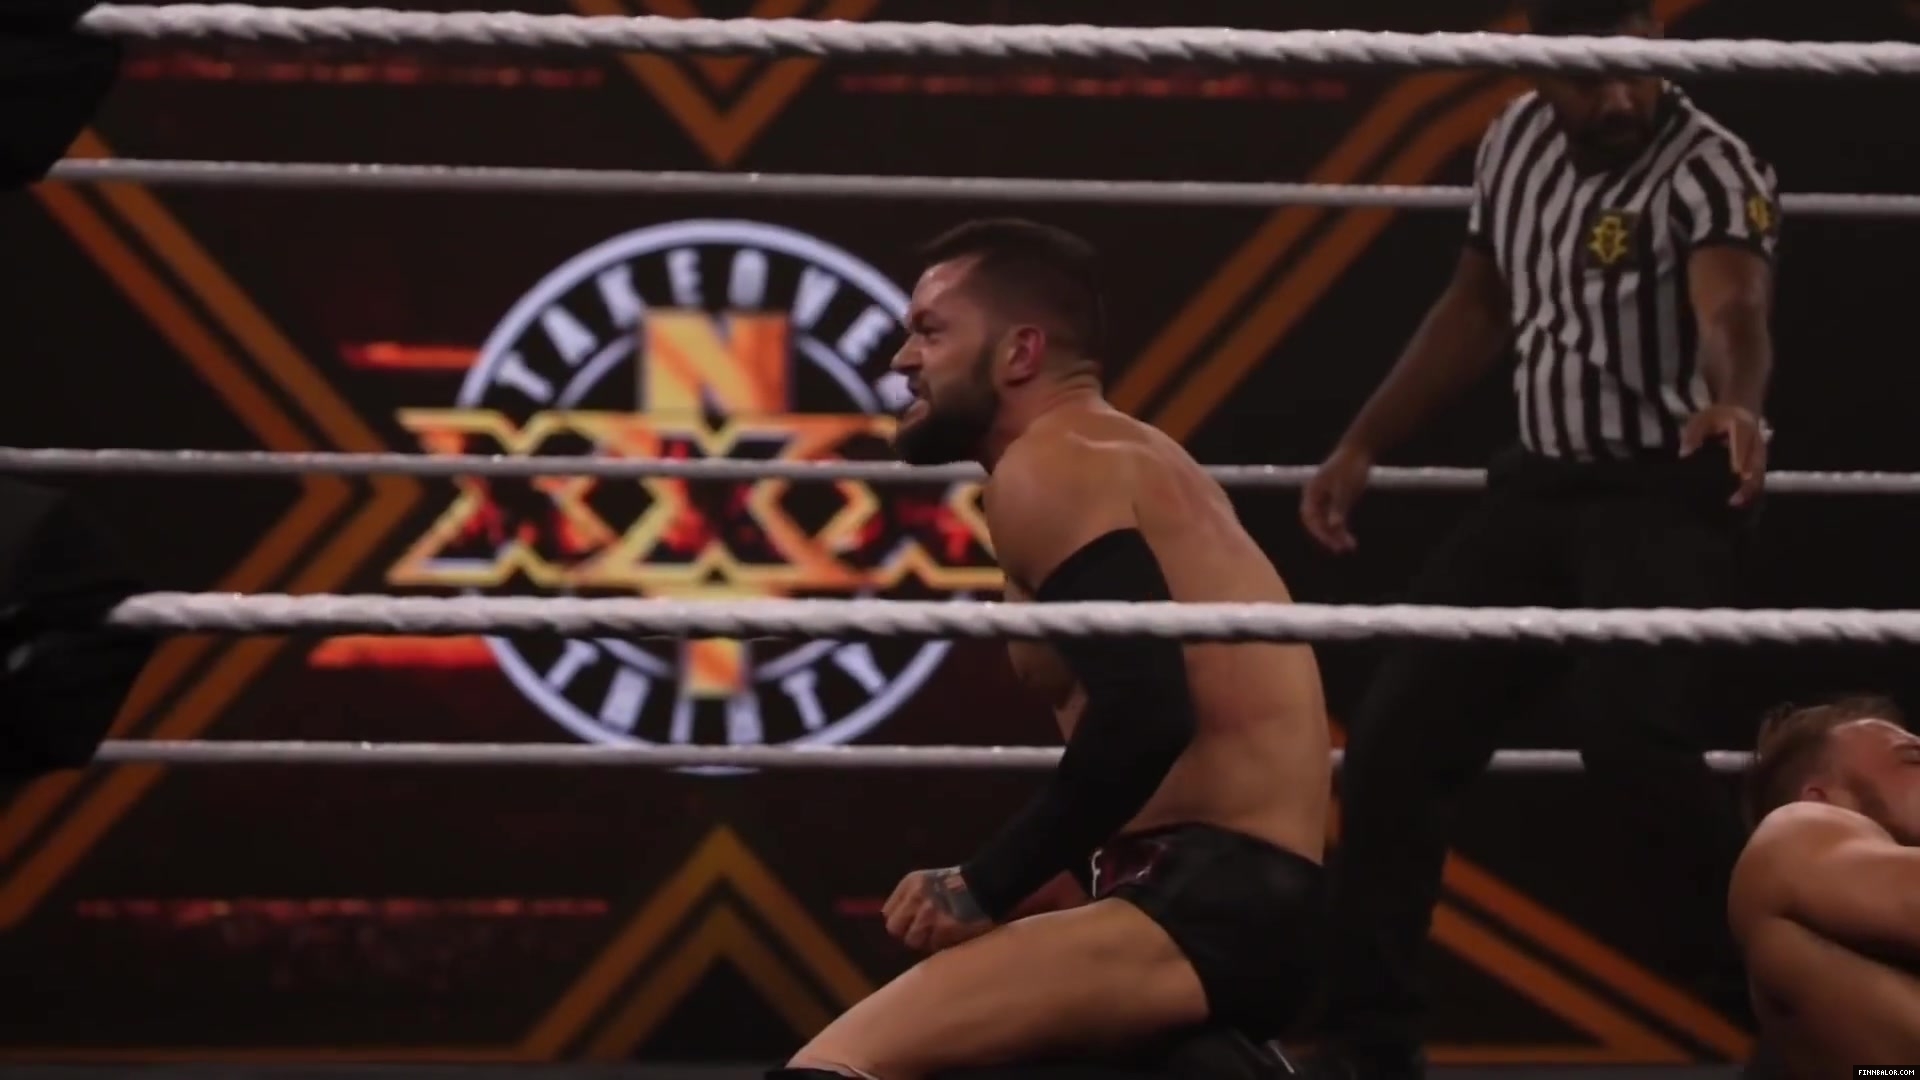 Finn_Balor___The_Rising_of_the_Prince_in_NXT_566.jpg